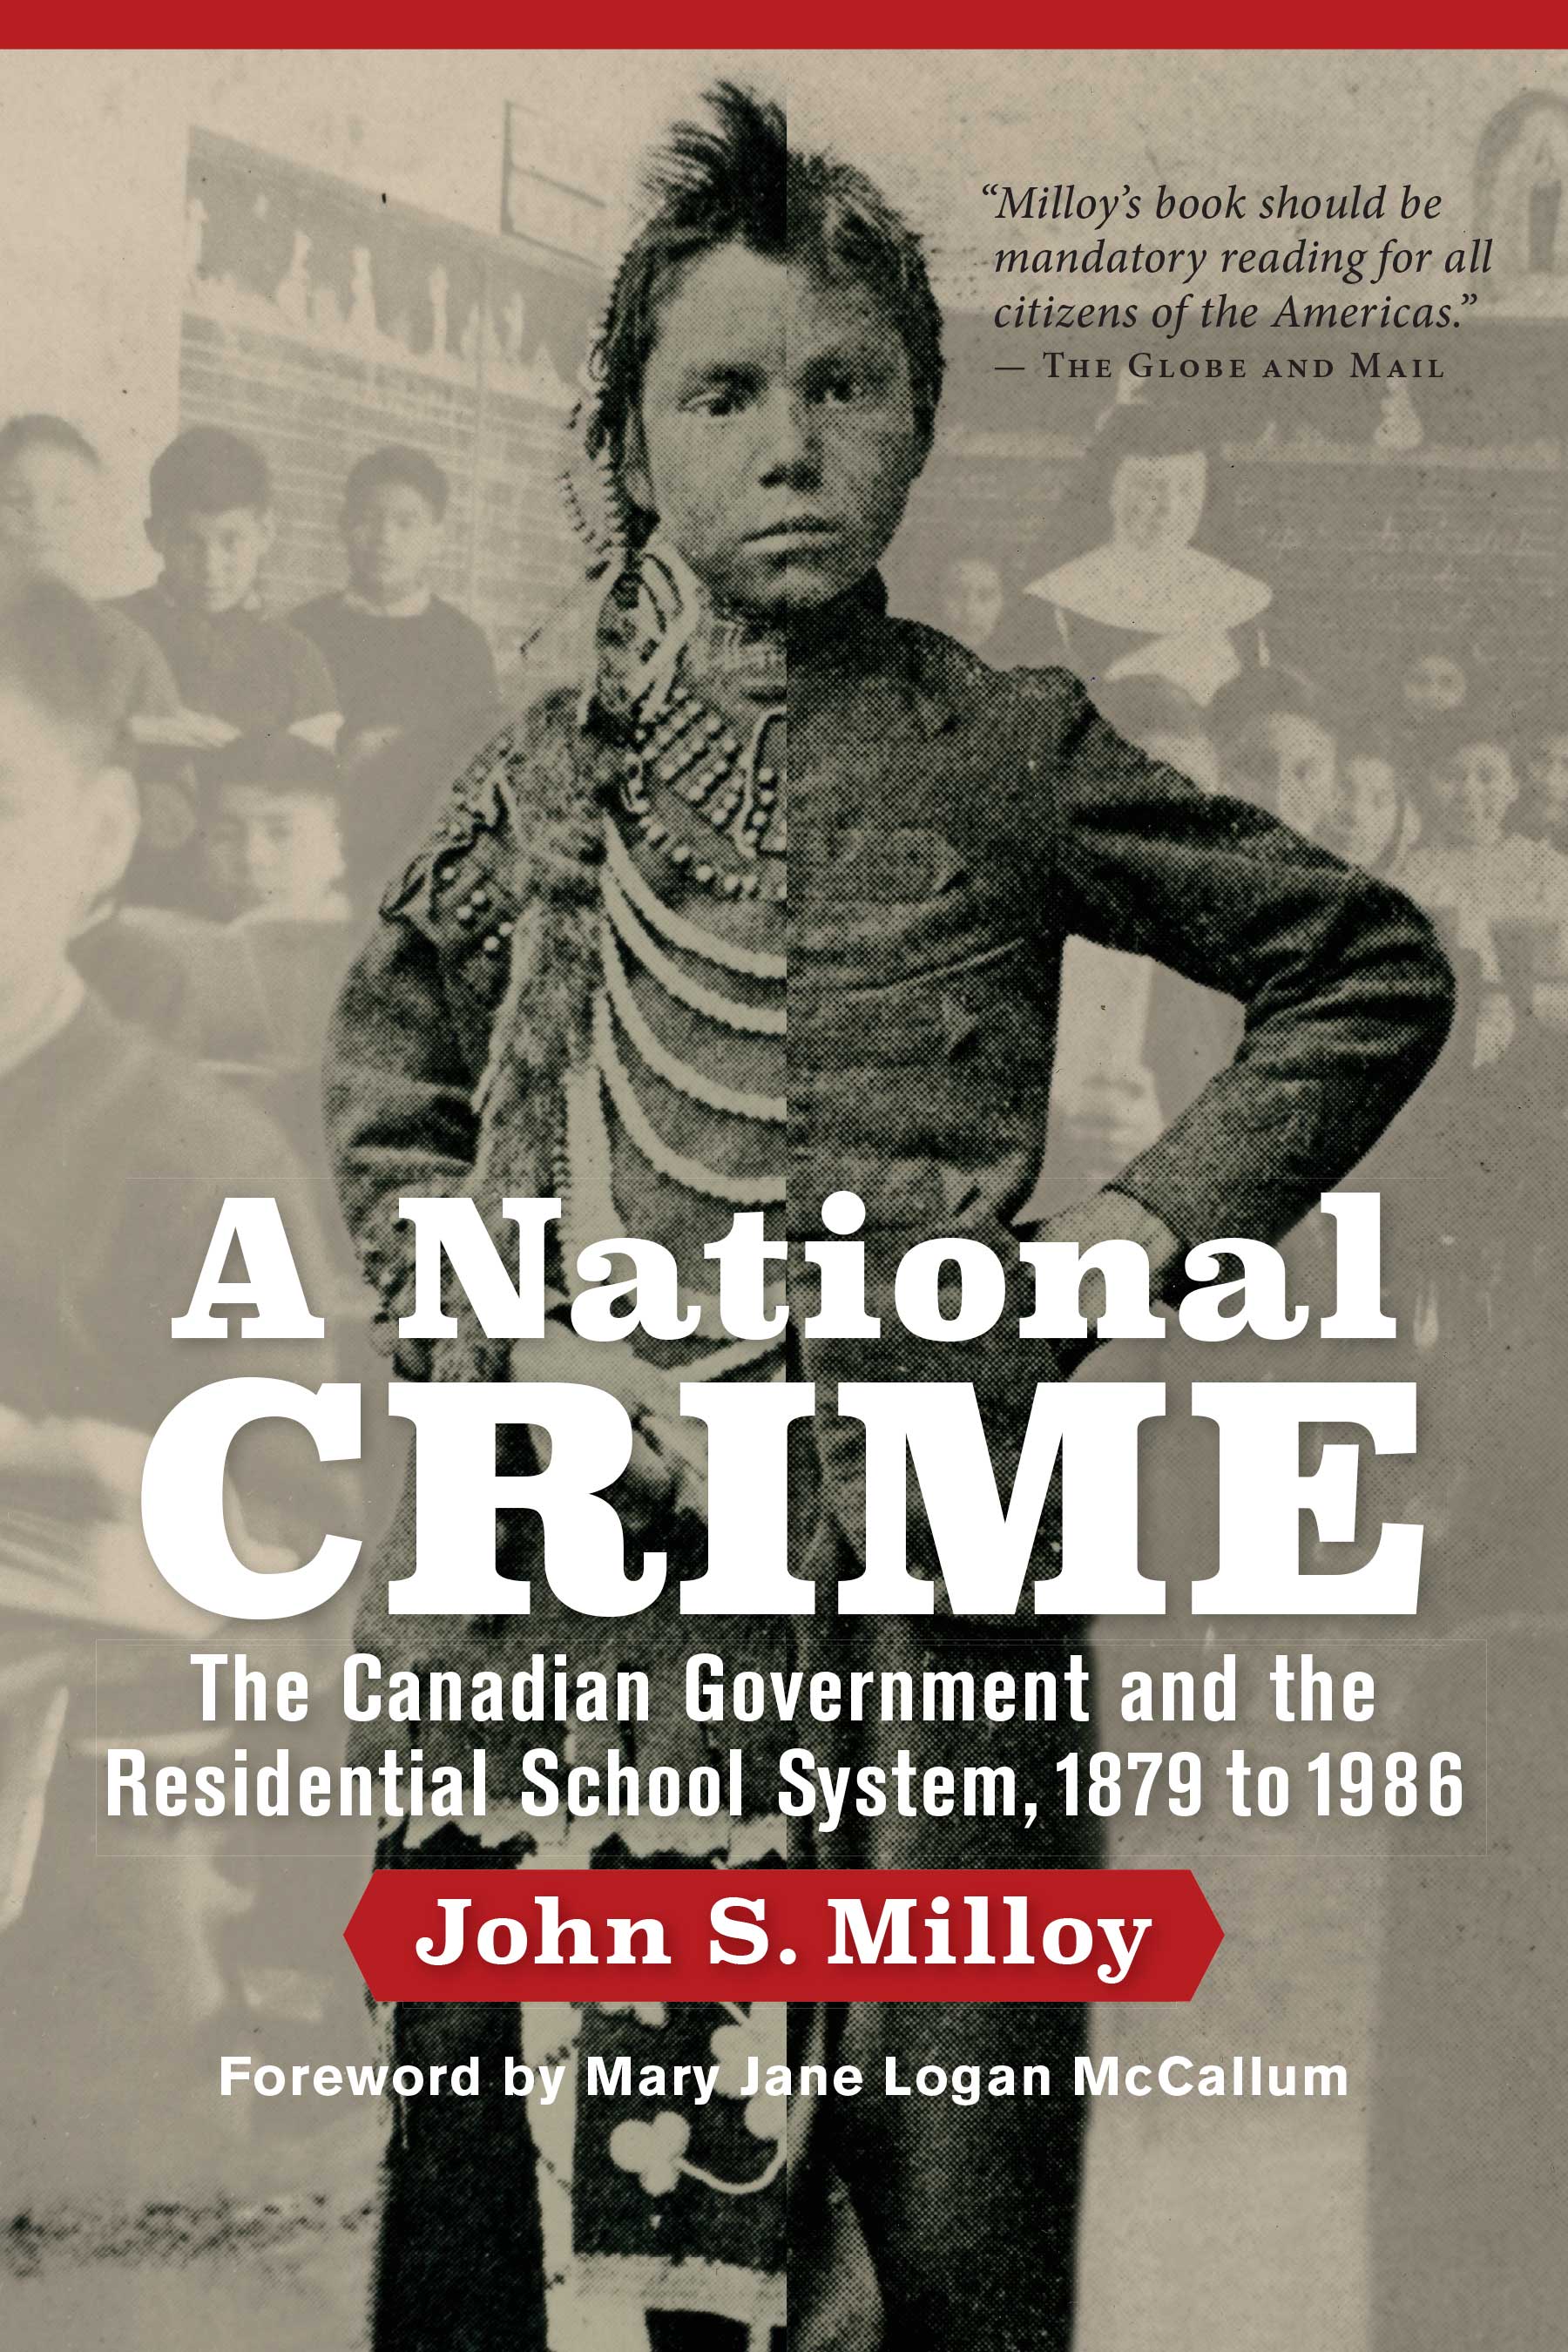 A National Crime : The Canadian Government and the Residential School System | History & Society